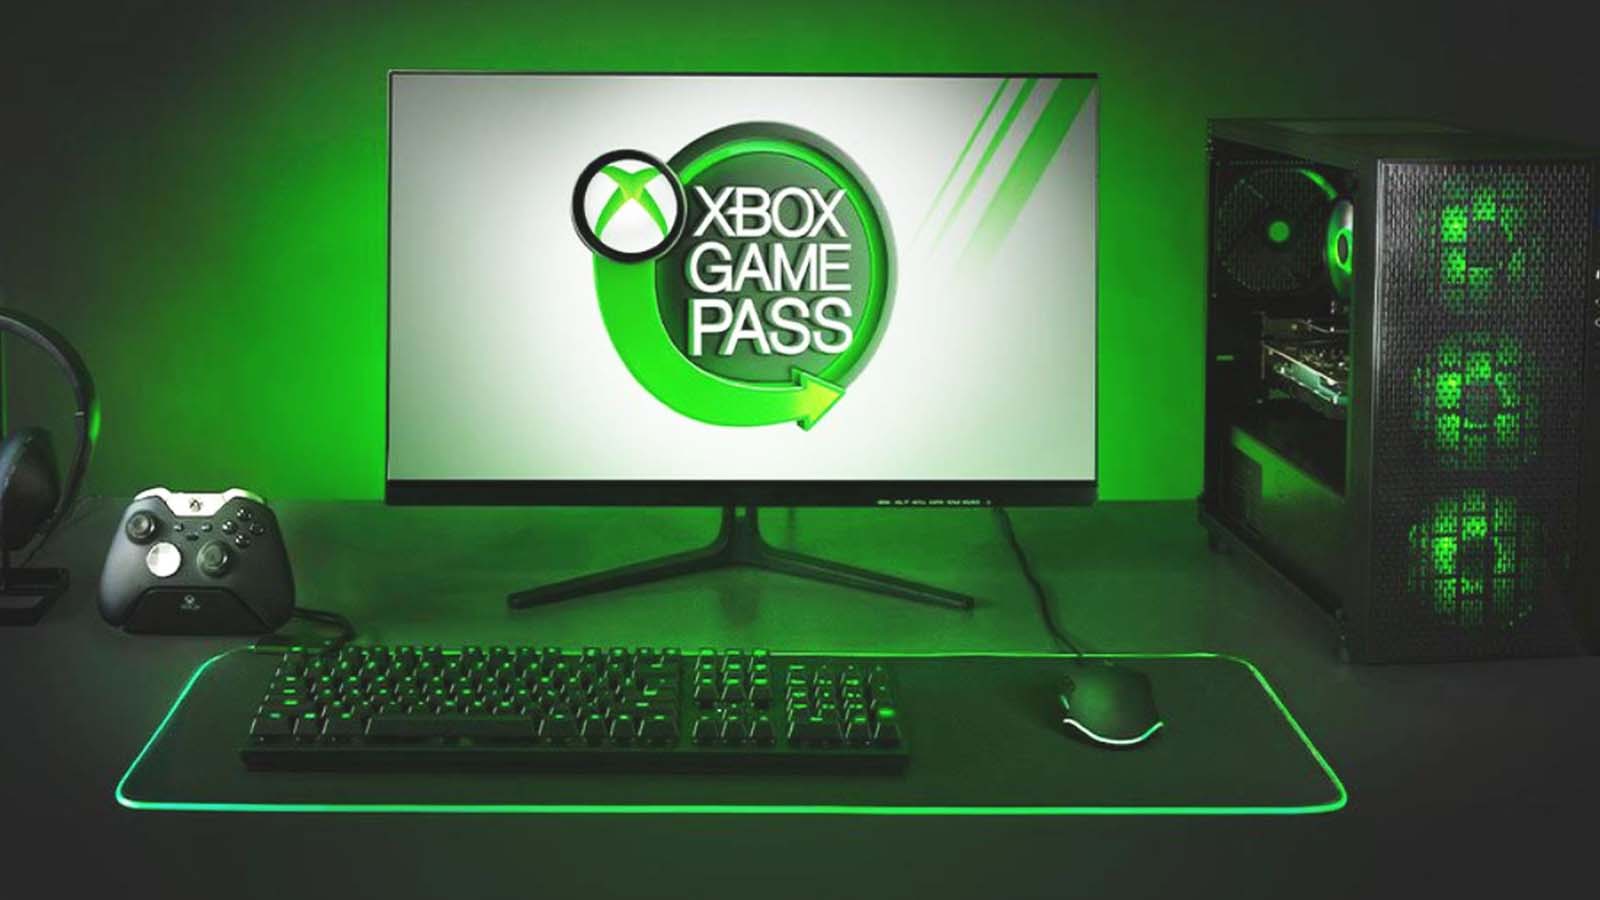 Xbox Game Pass Could Potentially Be Offered for Free through Ad Viewing